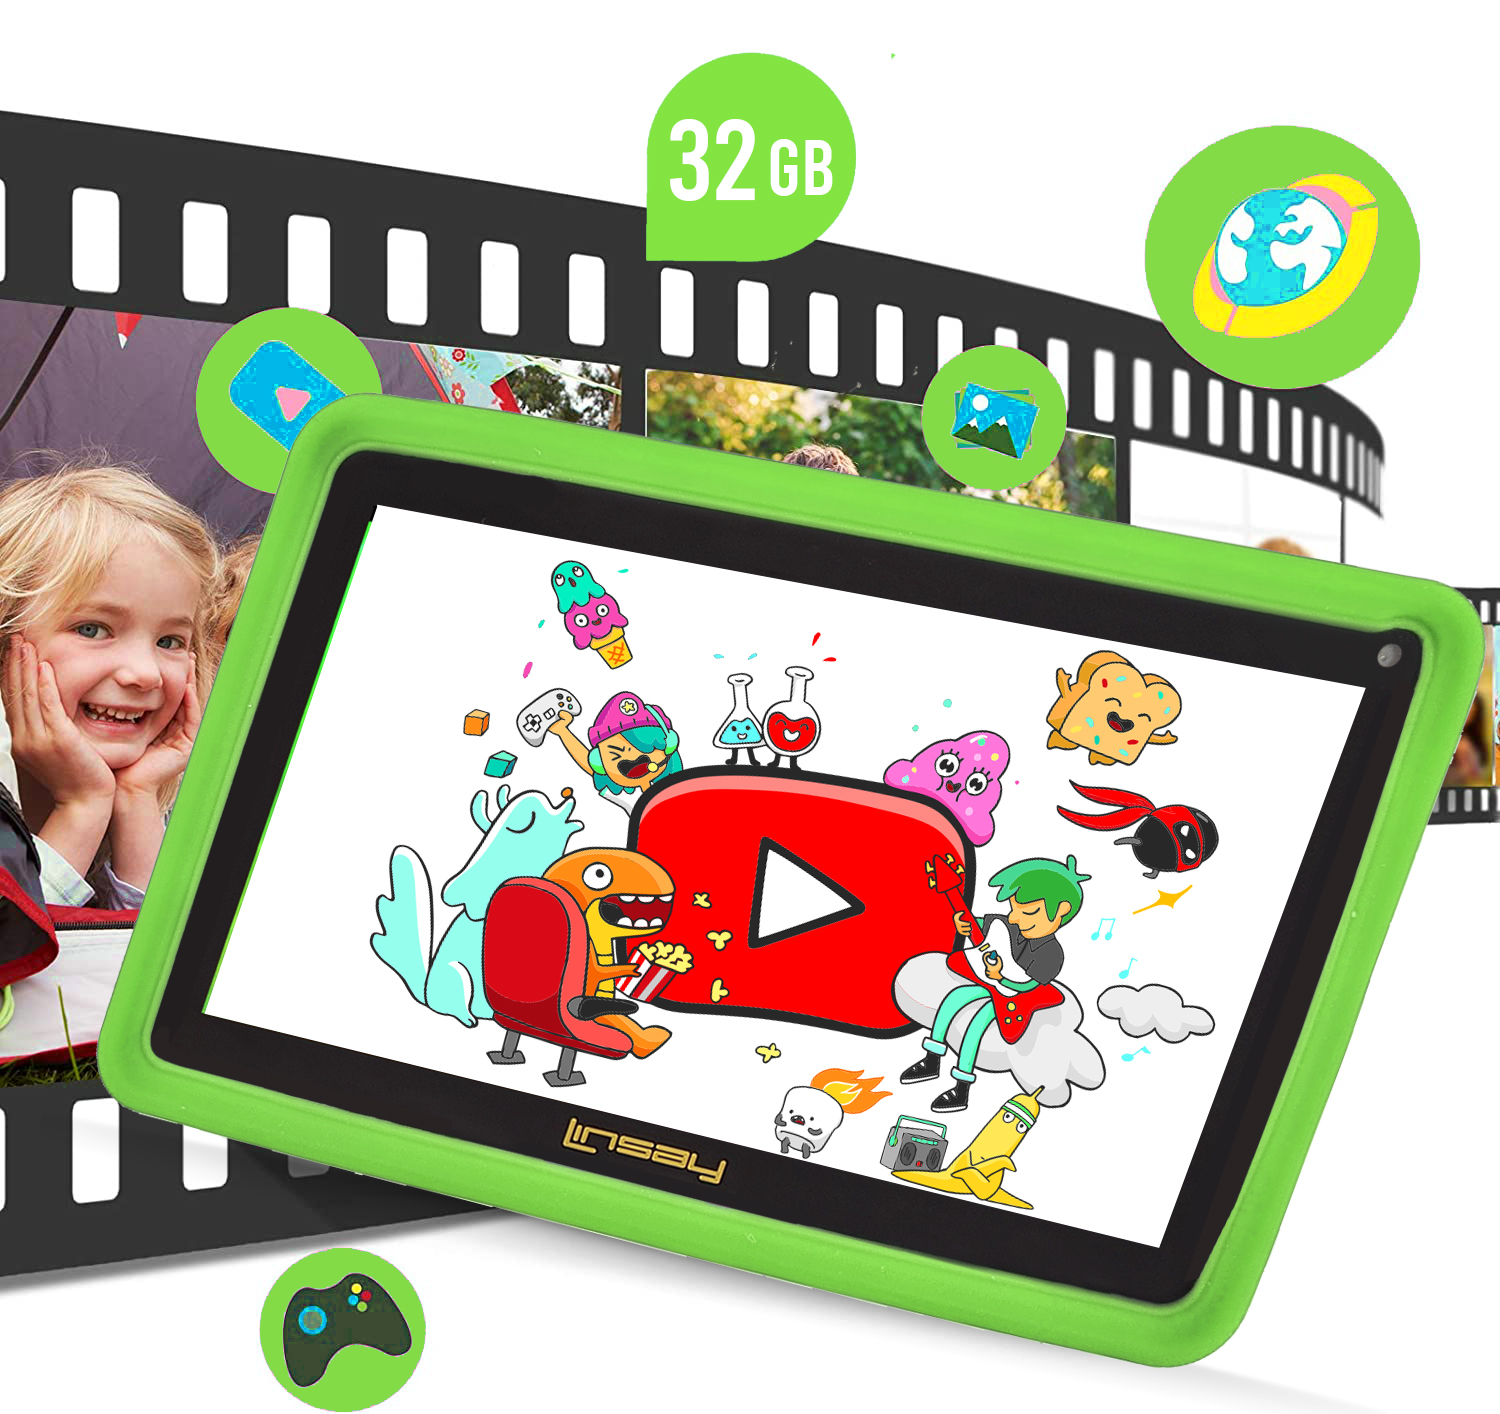 LINSAY 7" Kids Tablet 2GB RAM 32GB Android 12 WiFi Tablet for Children, Camera, Apps, Games, with Green Kid Defender Case LED Book Pack - image 7 of 7